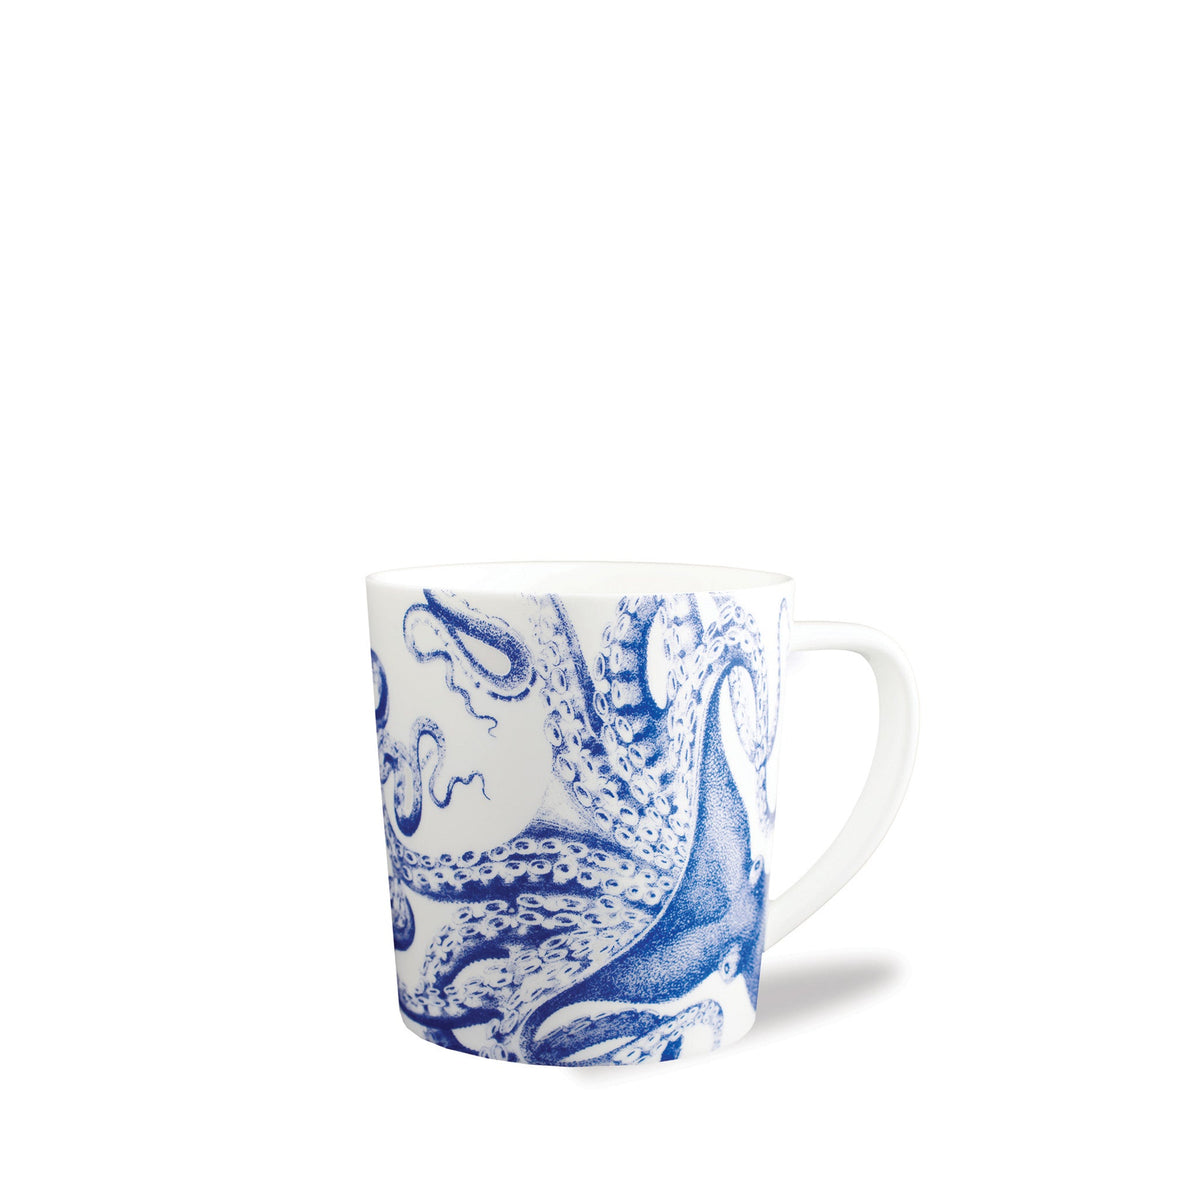 A premium porcelain Caskata Artisanal Home Lucy Mug, featuring a striking blue octopus design on the side, perfect for your morning coffee. Plus, it&#39;s dishwasher and microwave safe for added convenience.